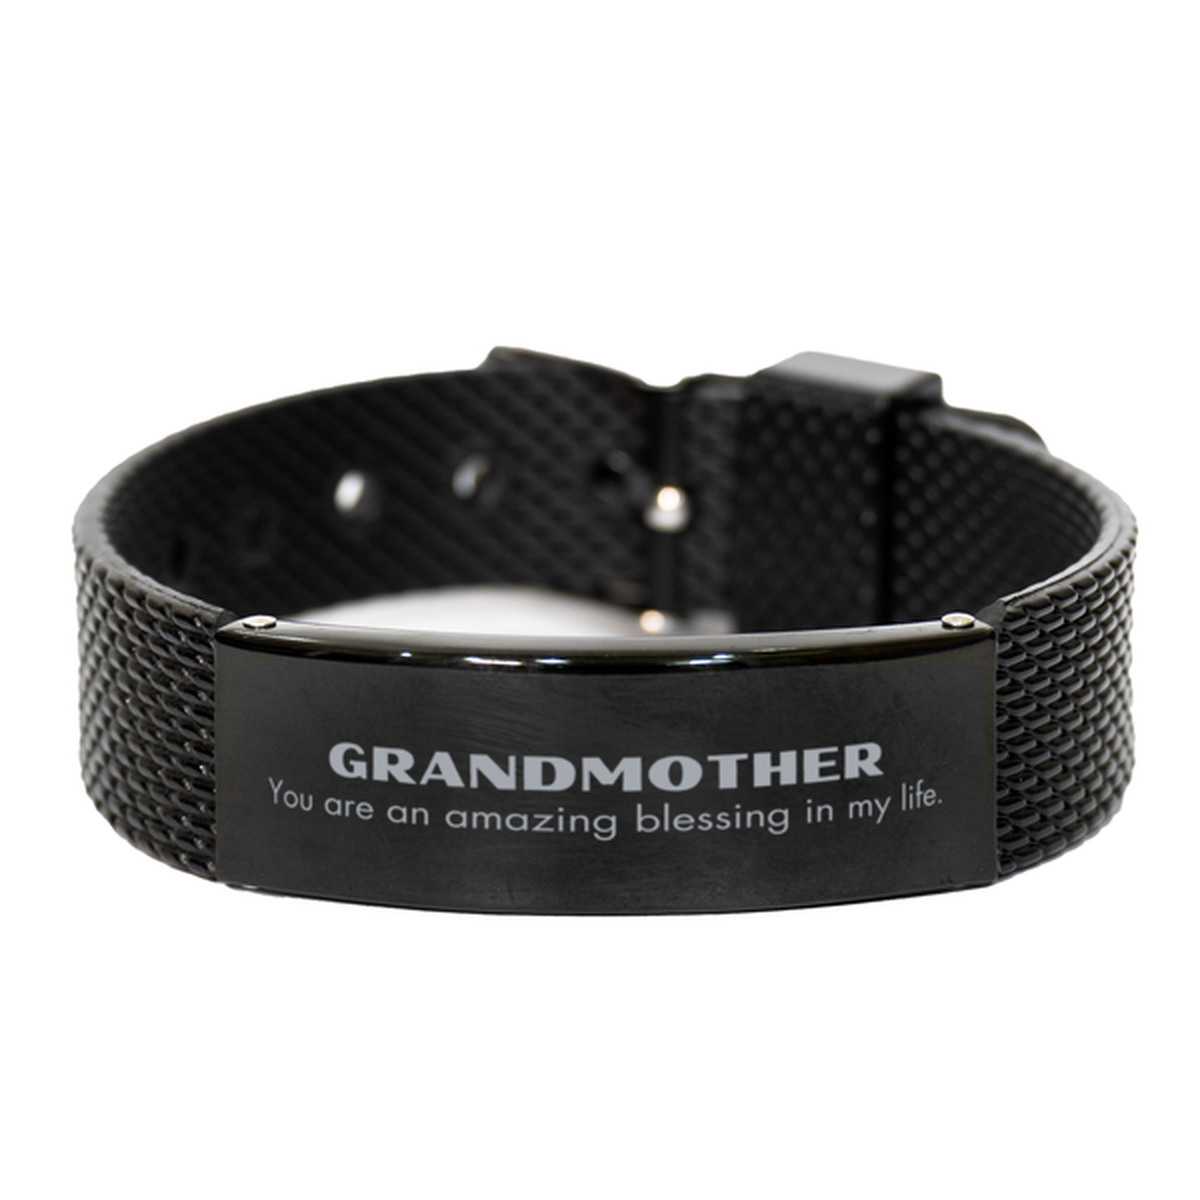 Grandmother Black Shark Mesh Bracelet, You are an amazing blessing in my life, Thank You Gifts For Grandmother, Inspirational Birthday Christmas Unique Gifts For Grandmother